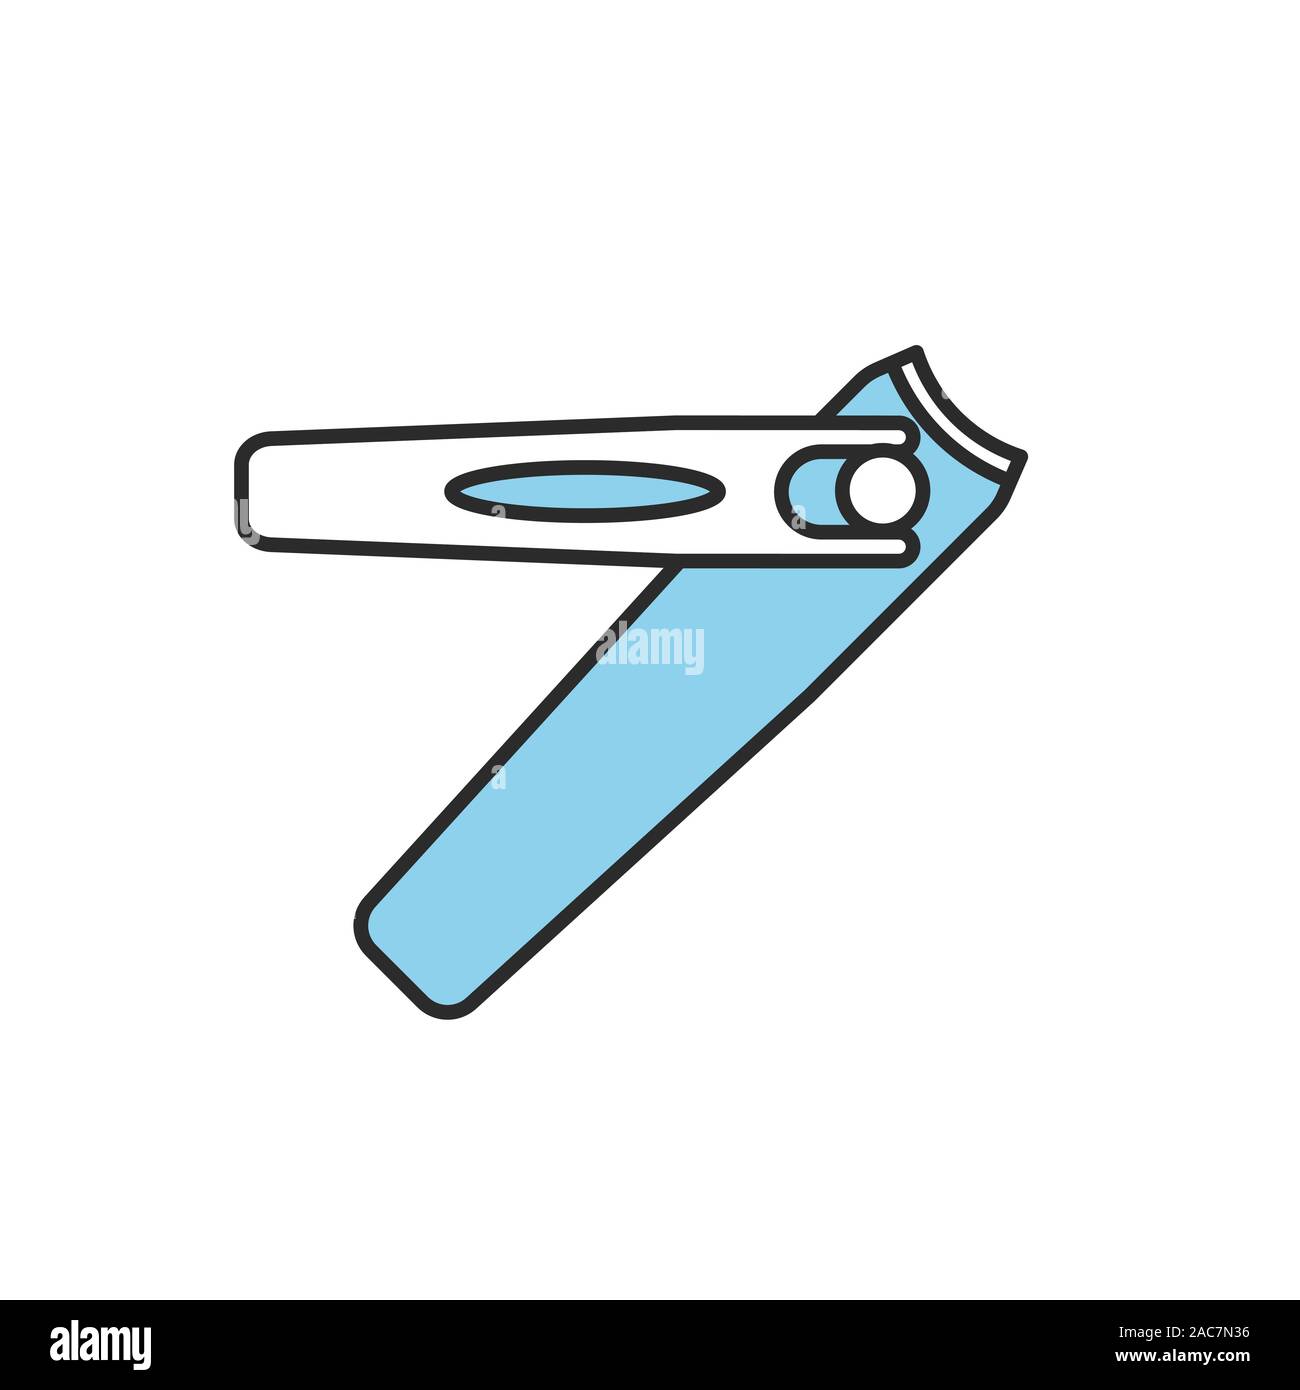 Nail Cutter Linear Icon Line Editable Stock Vector (Royalty Free)  2335363019 | Shutterstock